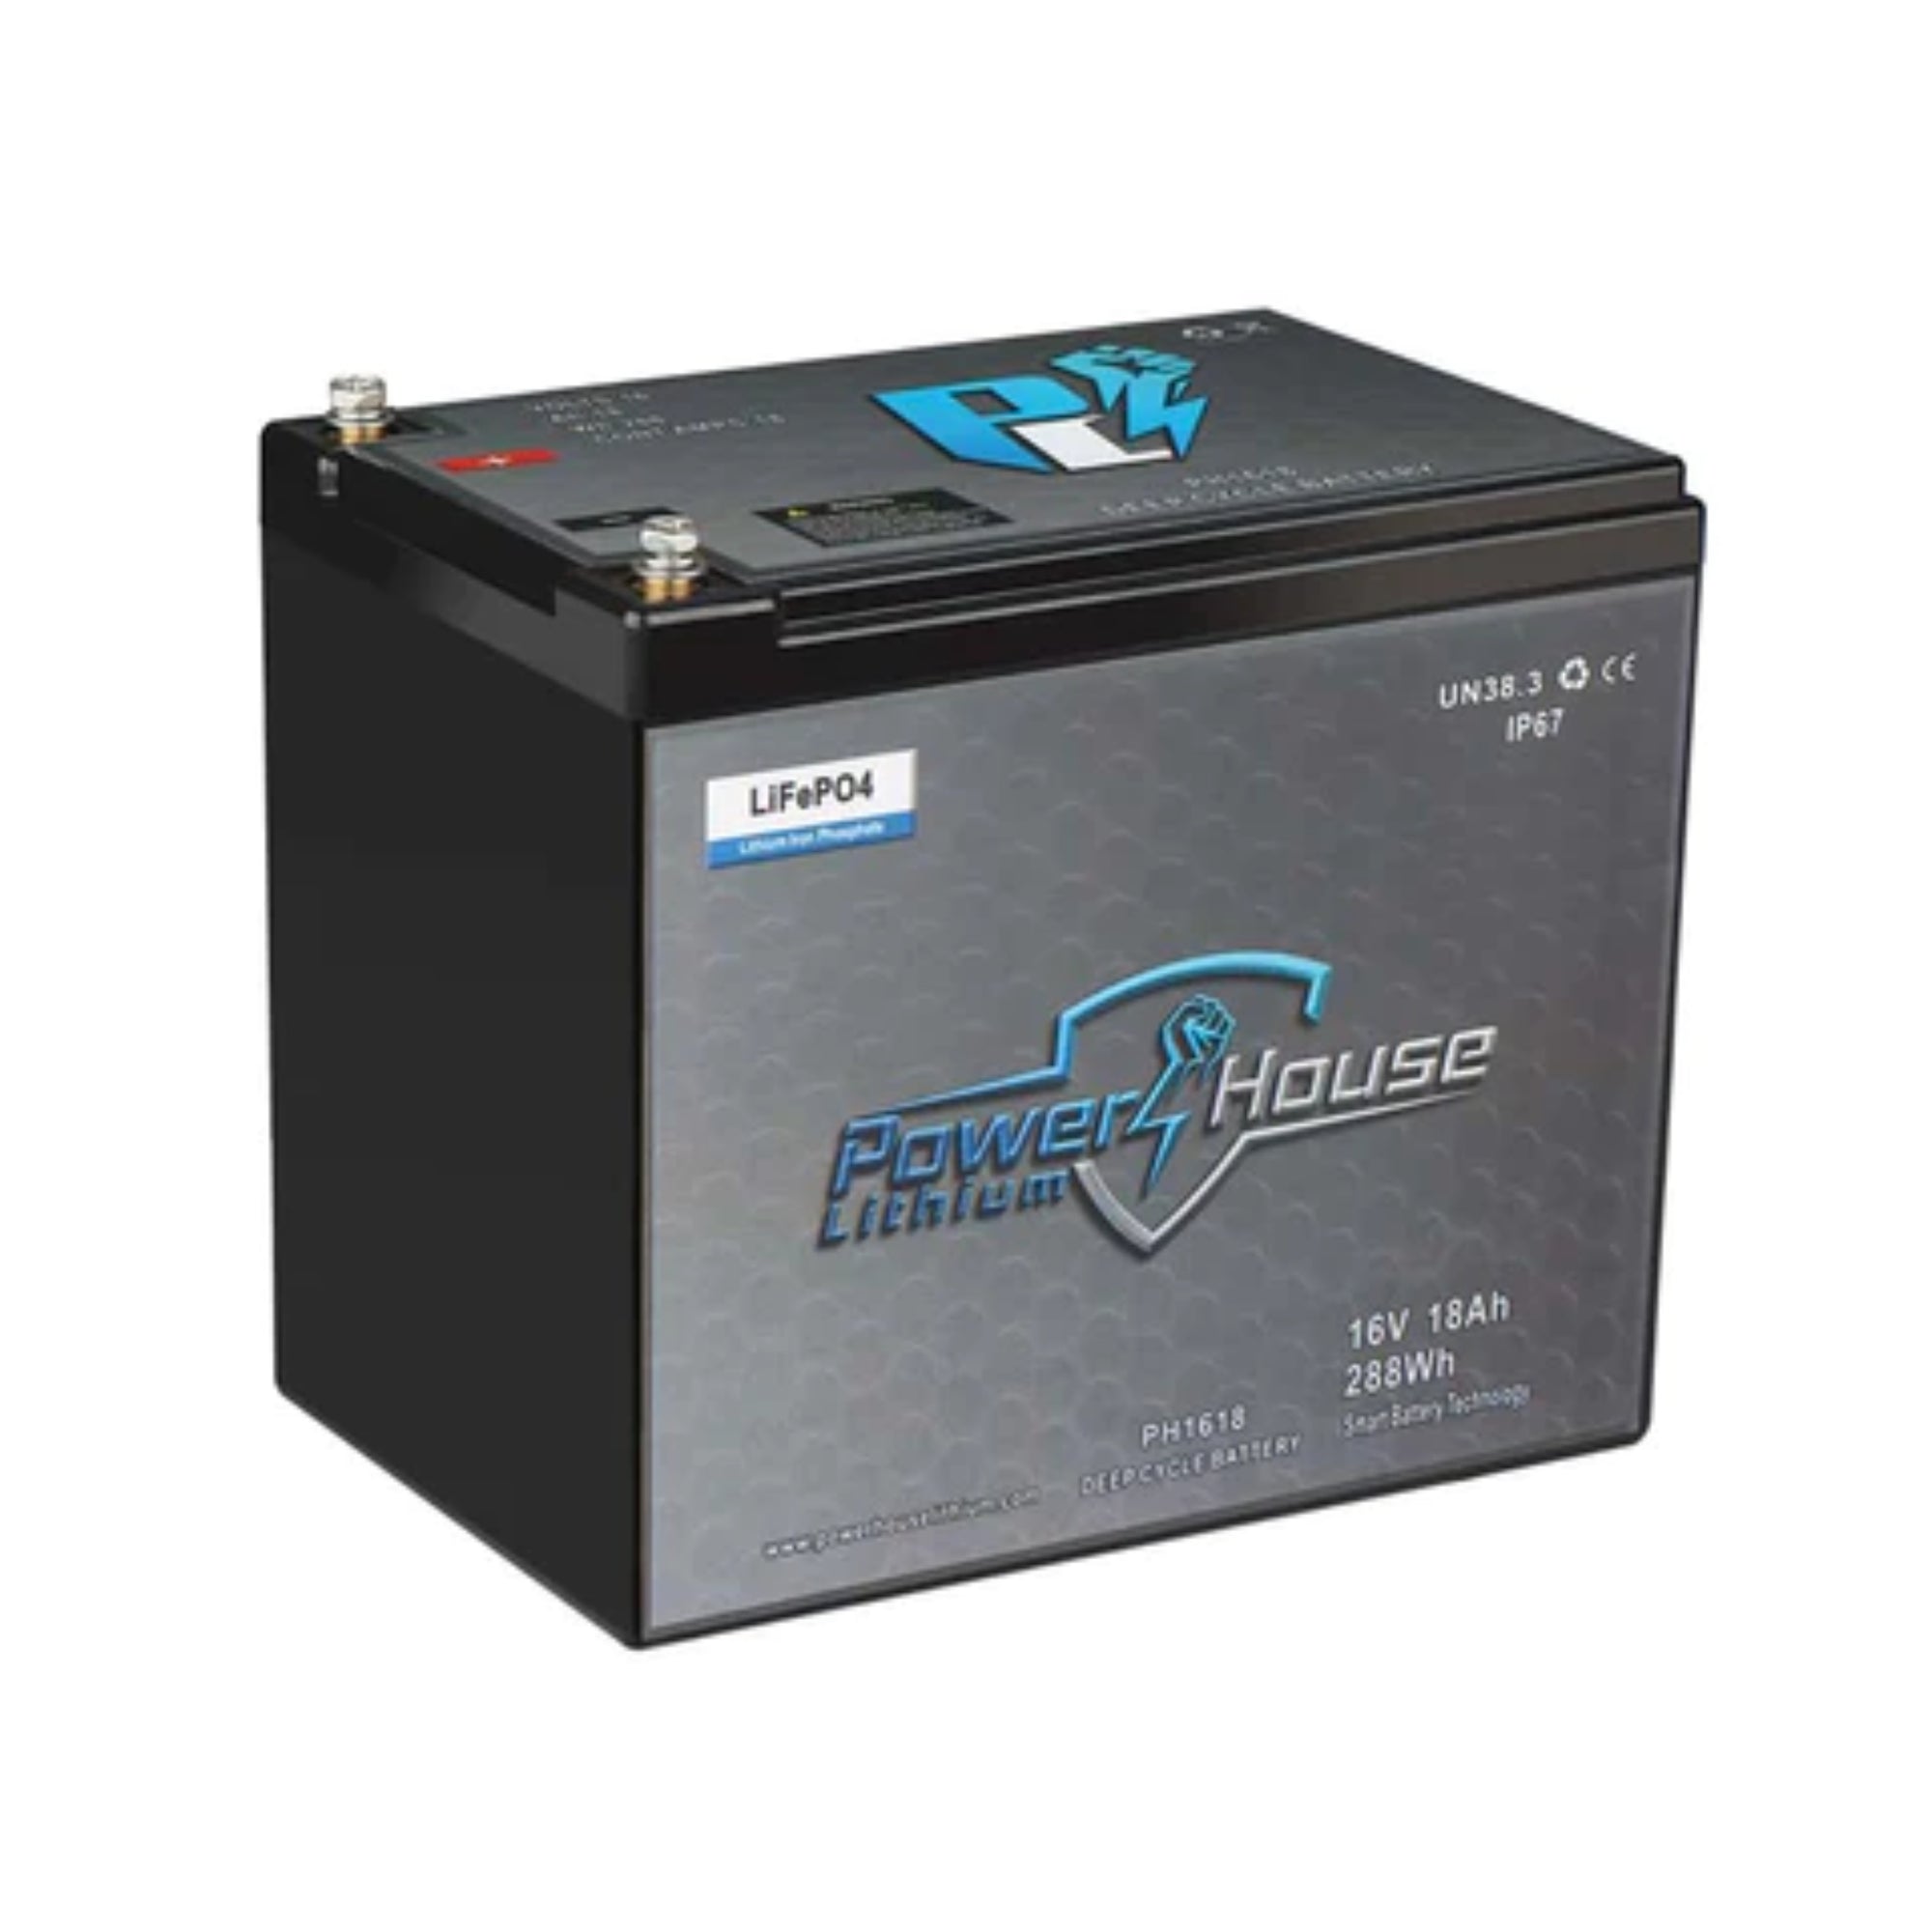 PowerHouse Lithium 16V 18Ah Deep Cycle Battery (Free Charger Included)